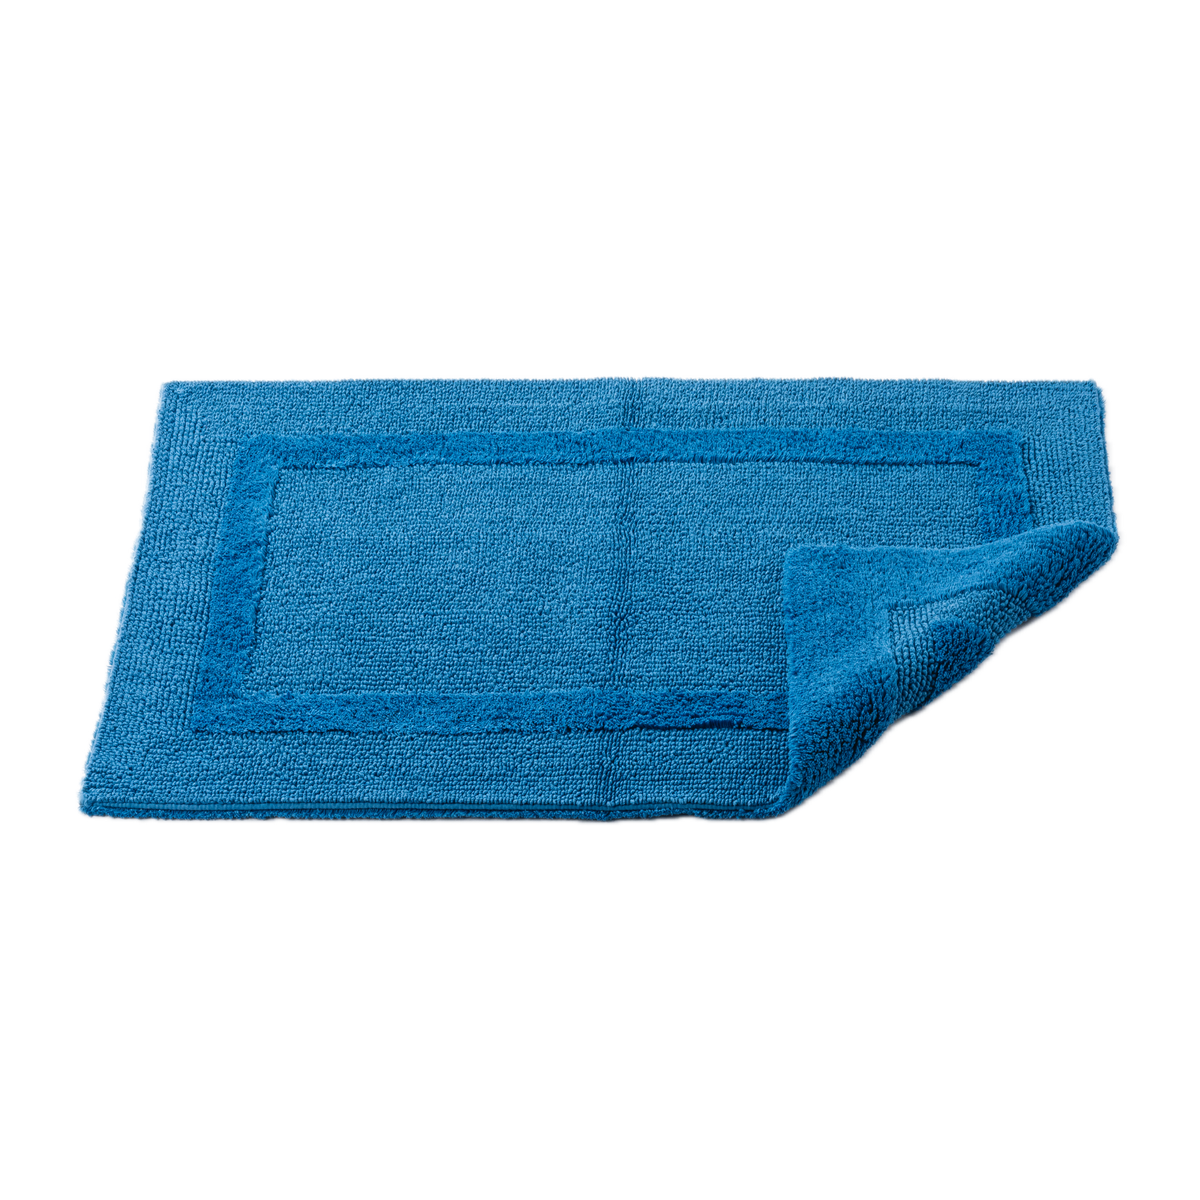 Abyss Habidecor Reversible Bath Rug in Ocean Color with Corner Fold